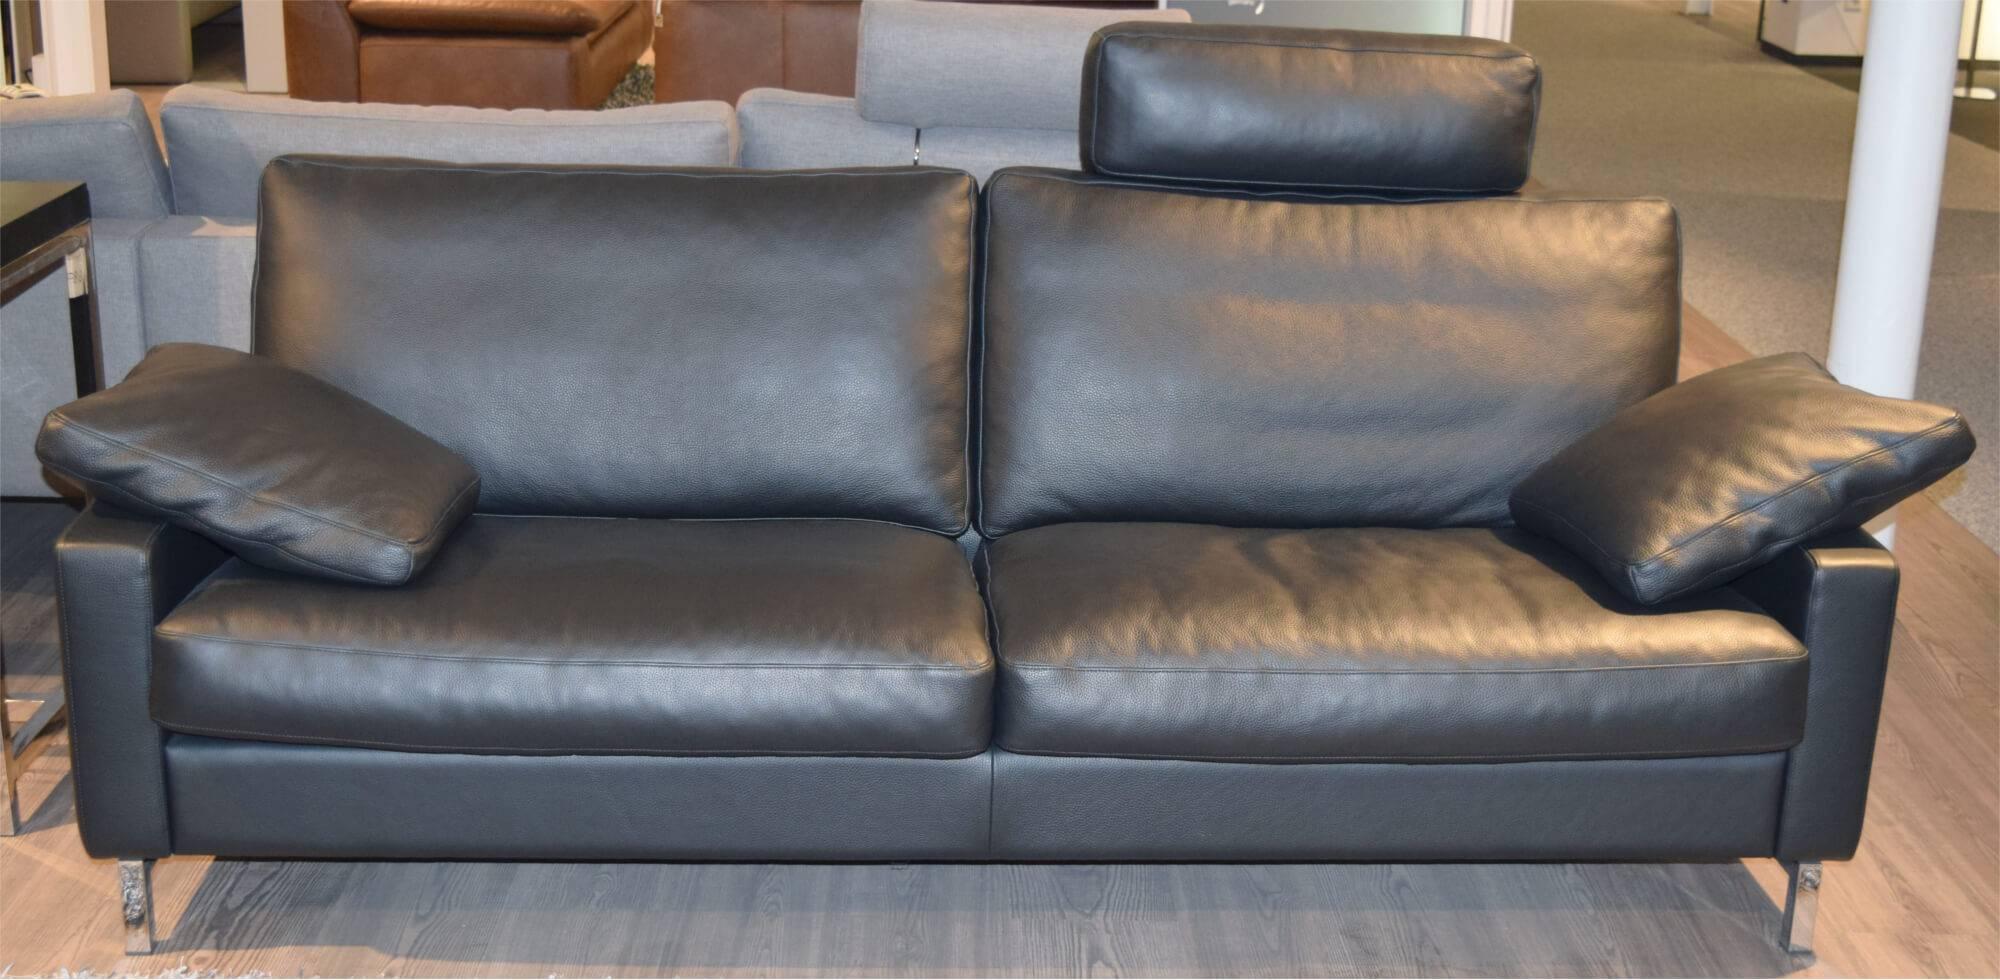 Here we offer a set of two leather sofas by the famous German manufacture WK Wohnen. Made from finest leather these sofas stand on a metal base for having long lasting joy in your apartment.